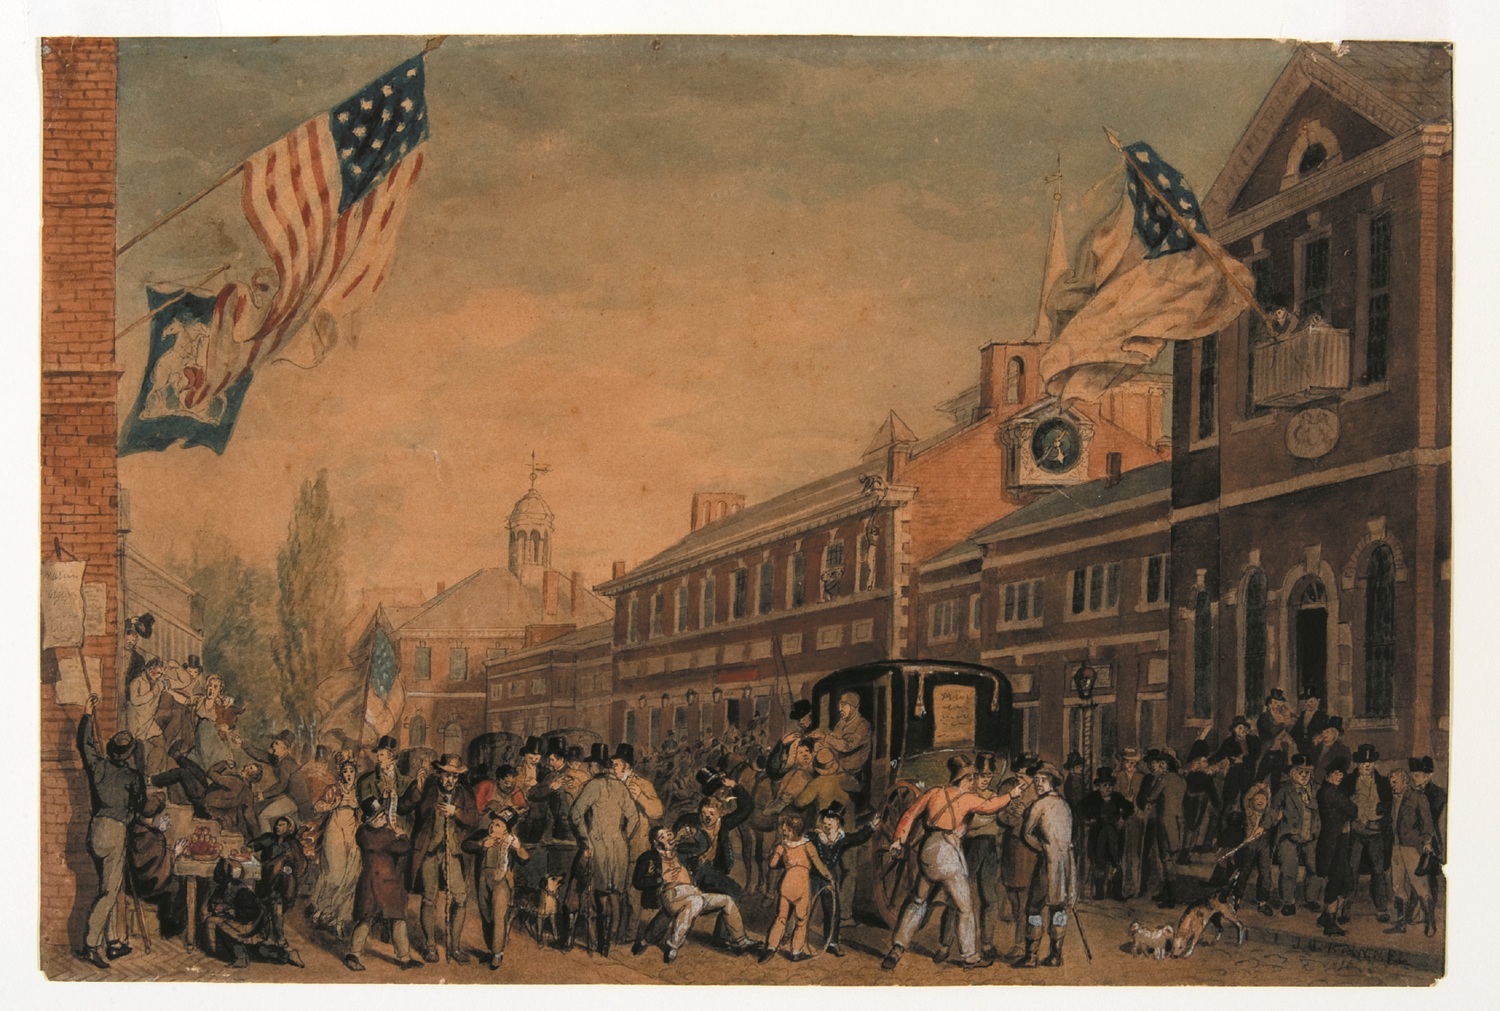 Depiction of election-day activities in Philadelphia